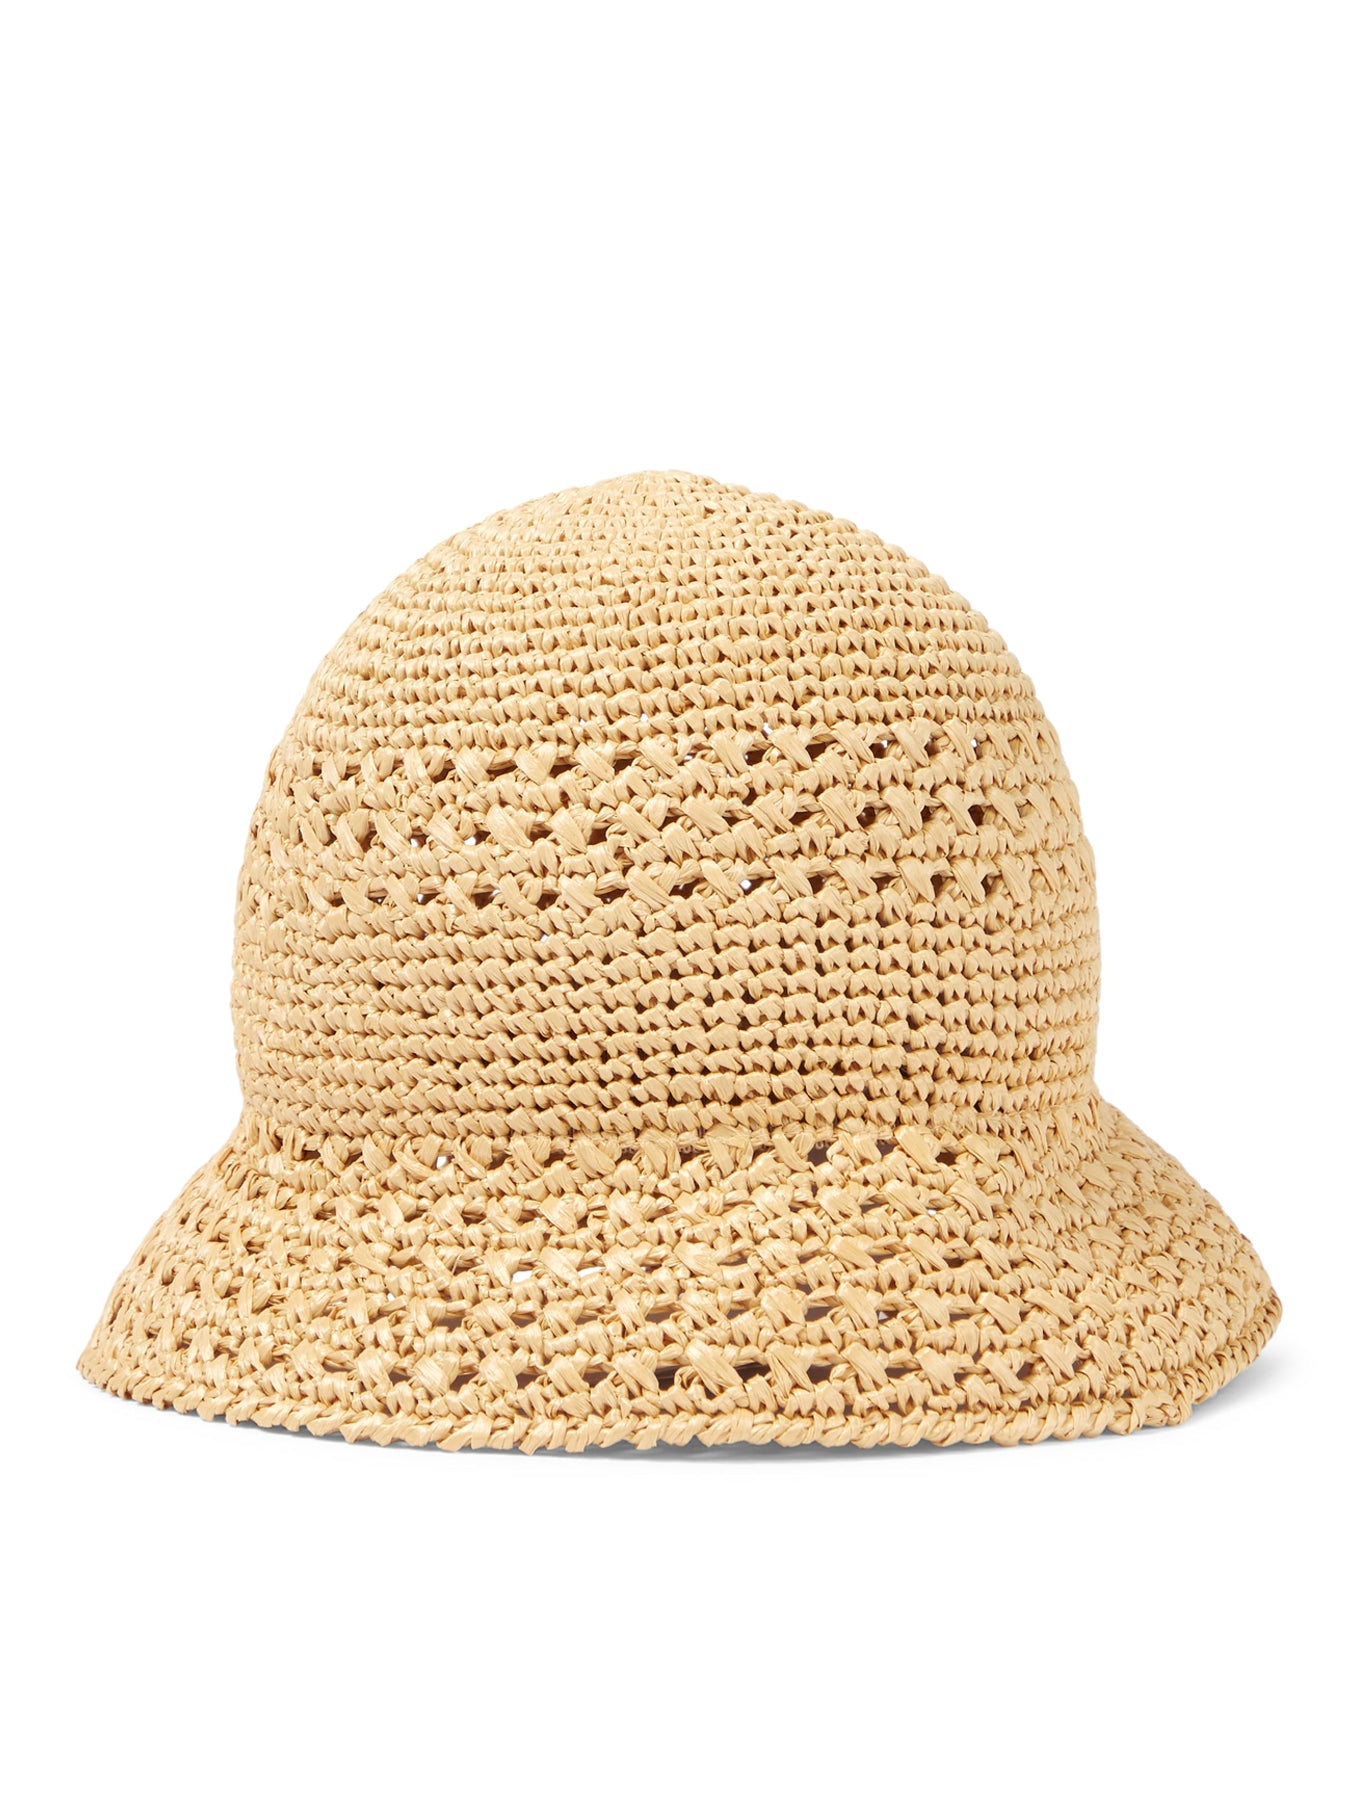 woven fabric hat